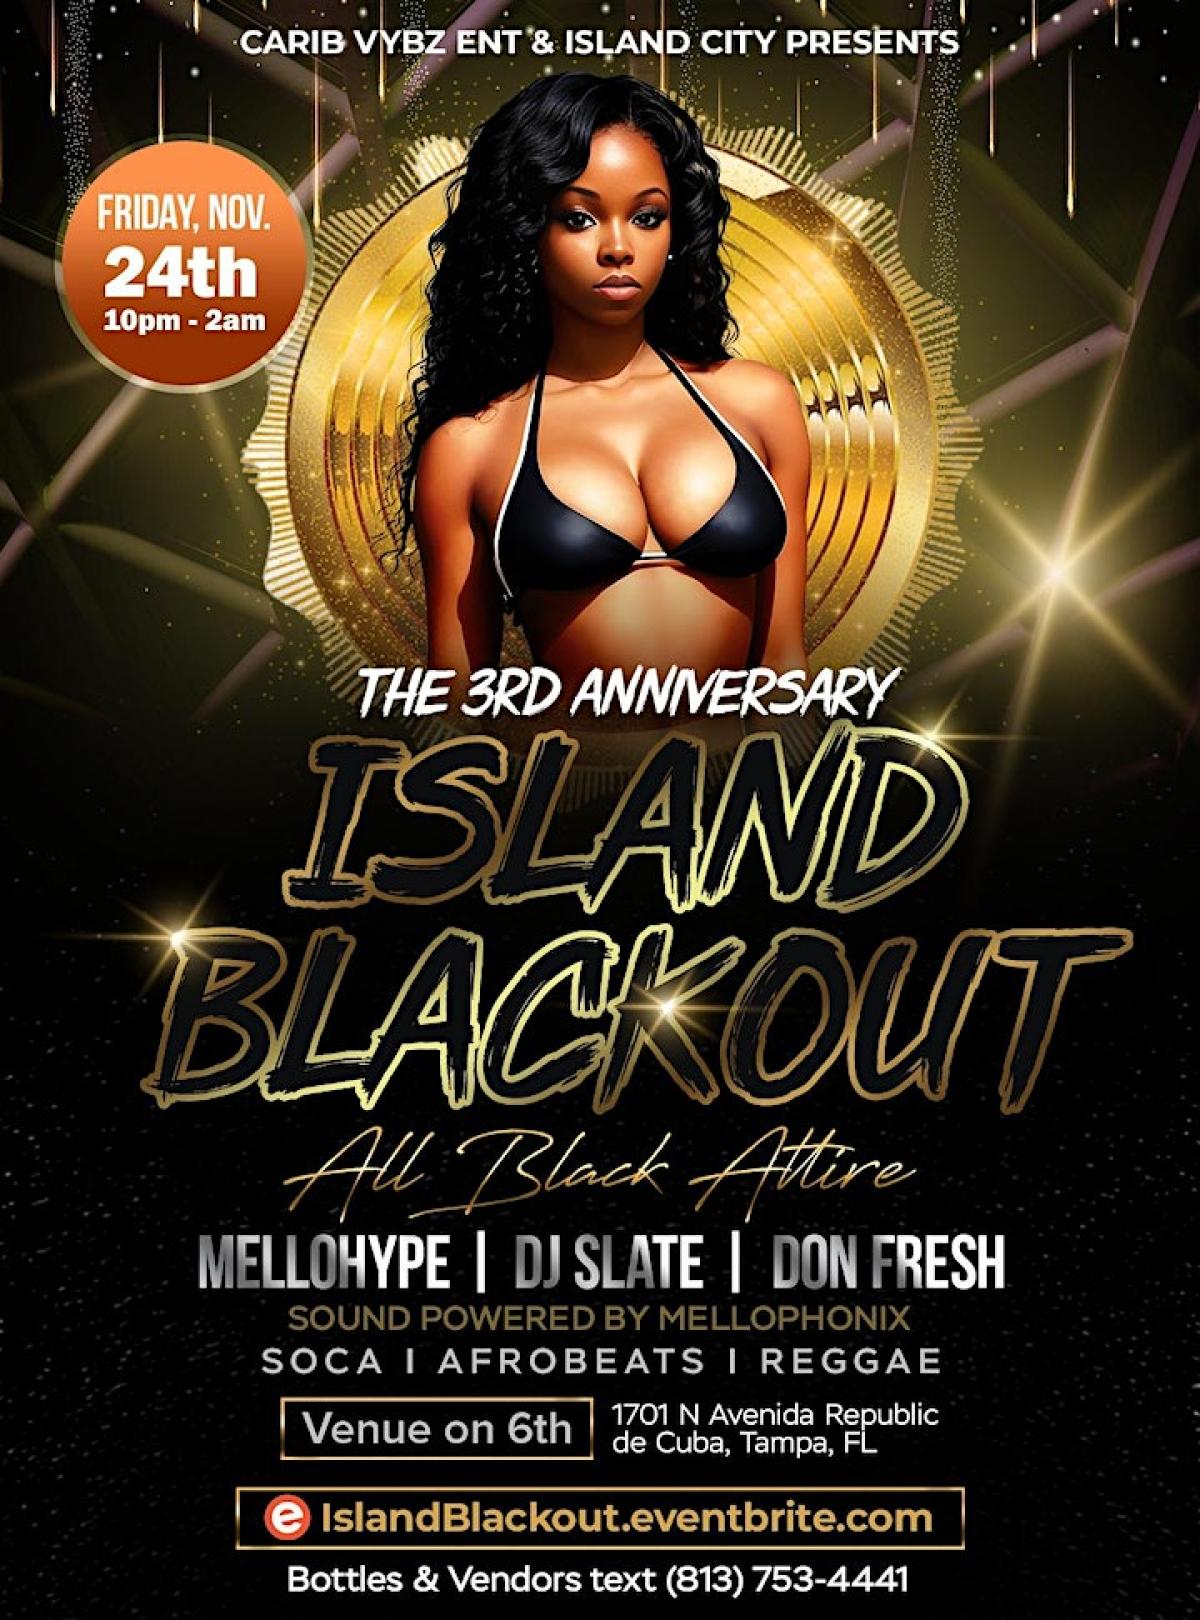 Island Blackout flyer or graphic.